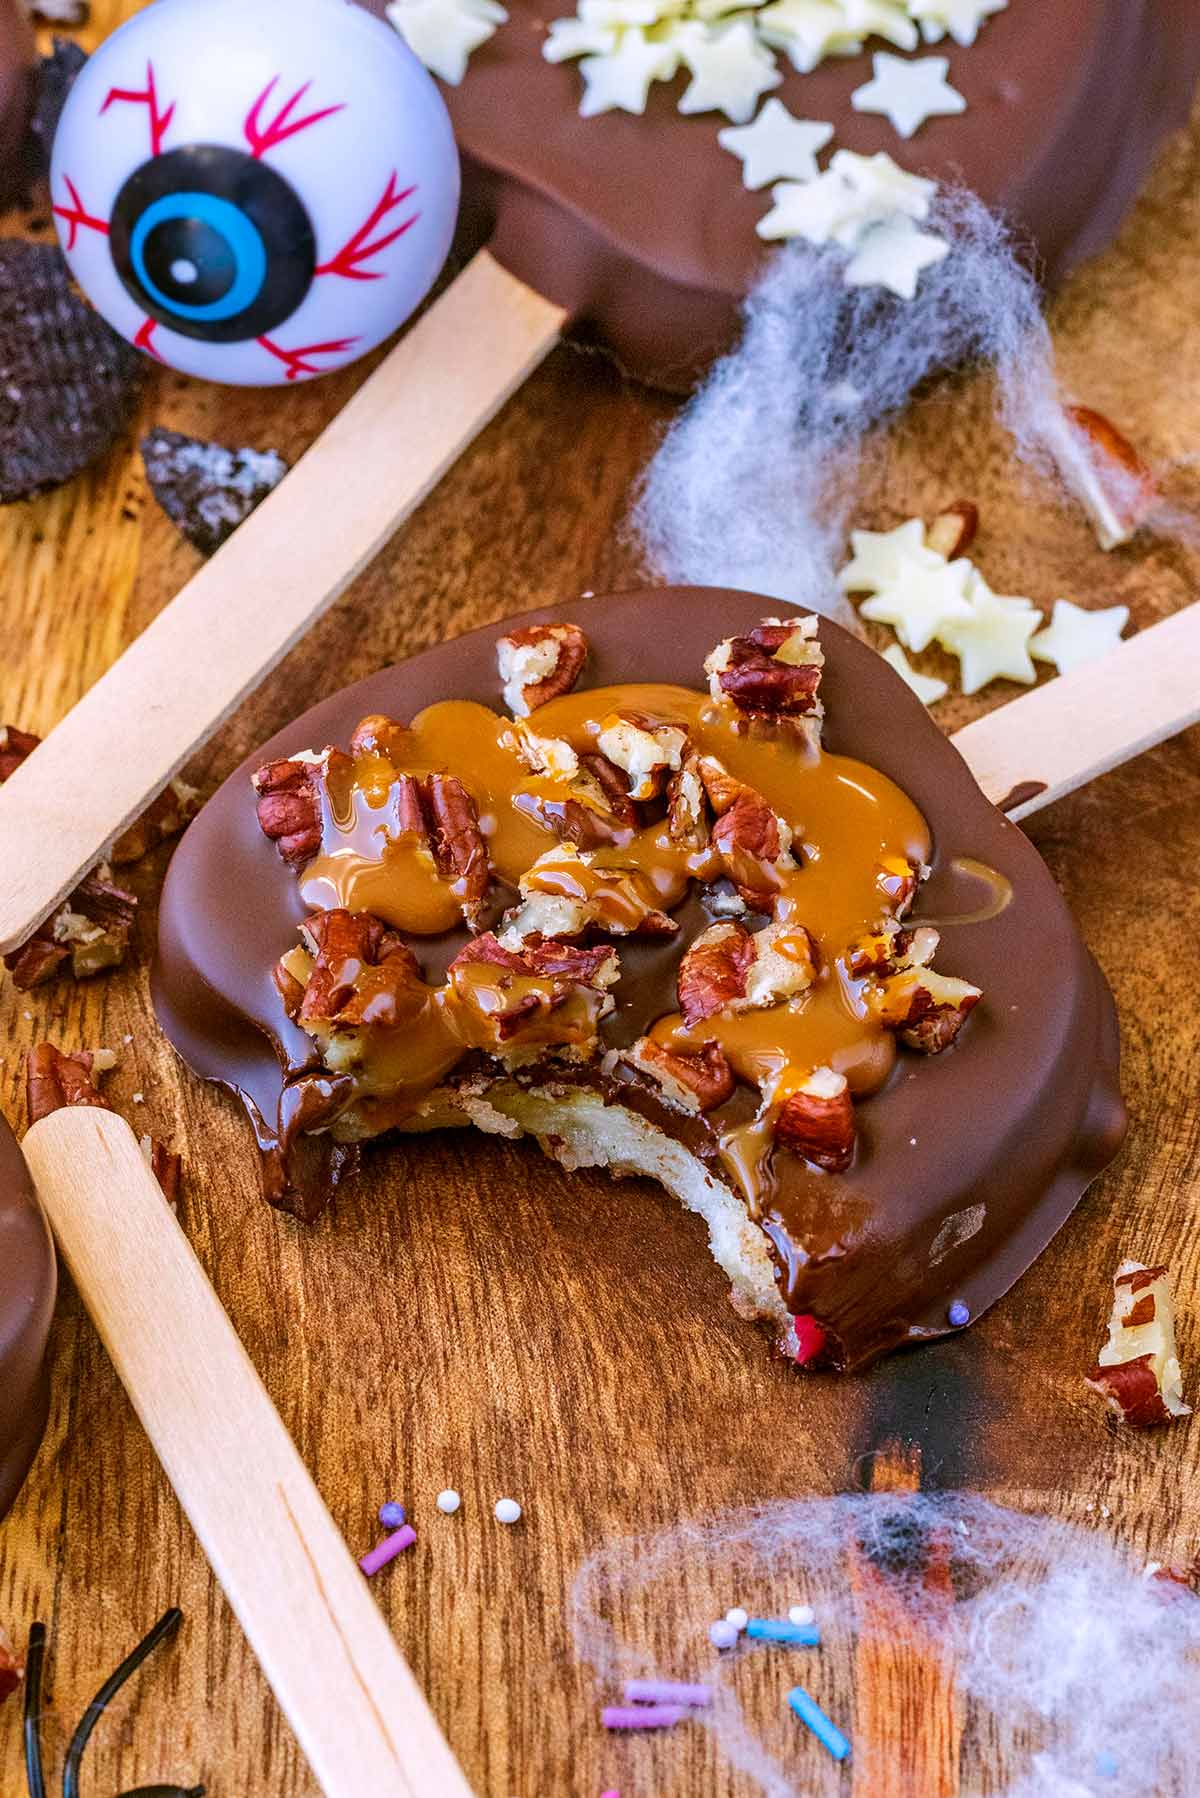 An apple slice covered in chocolate and decorated with nuts, with a bite taken out of it.